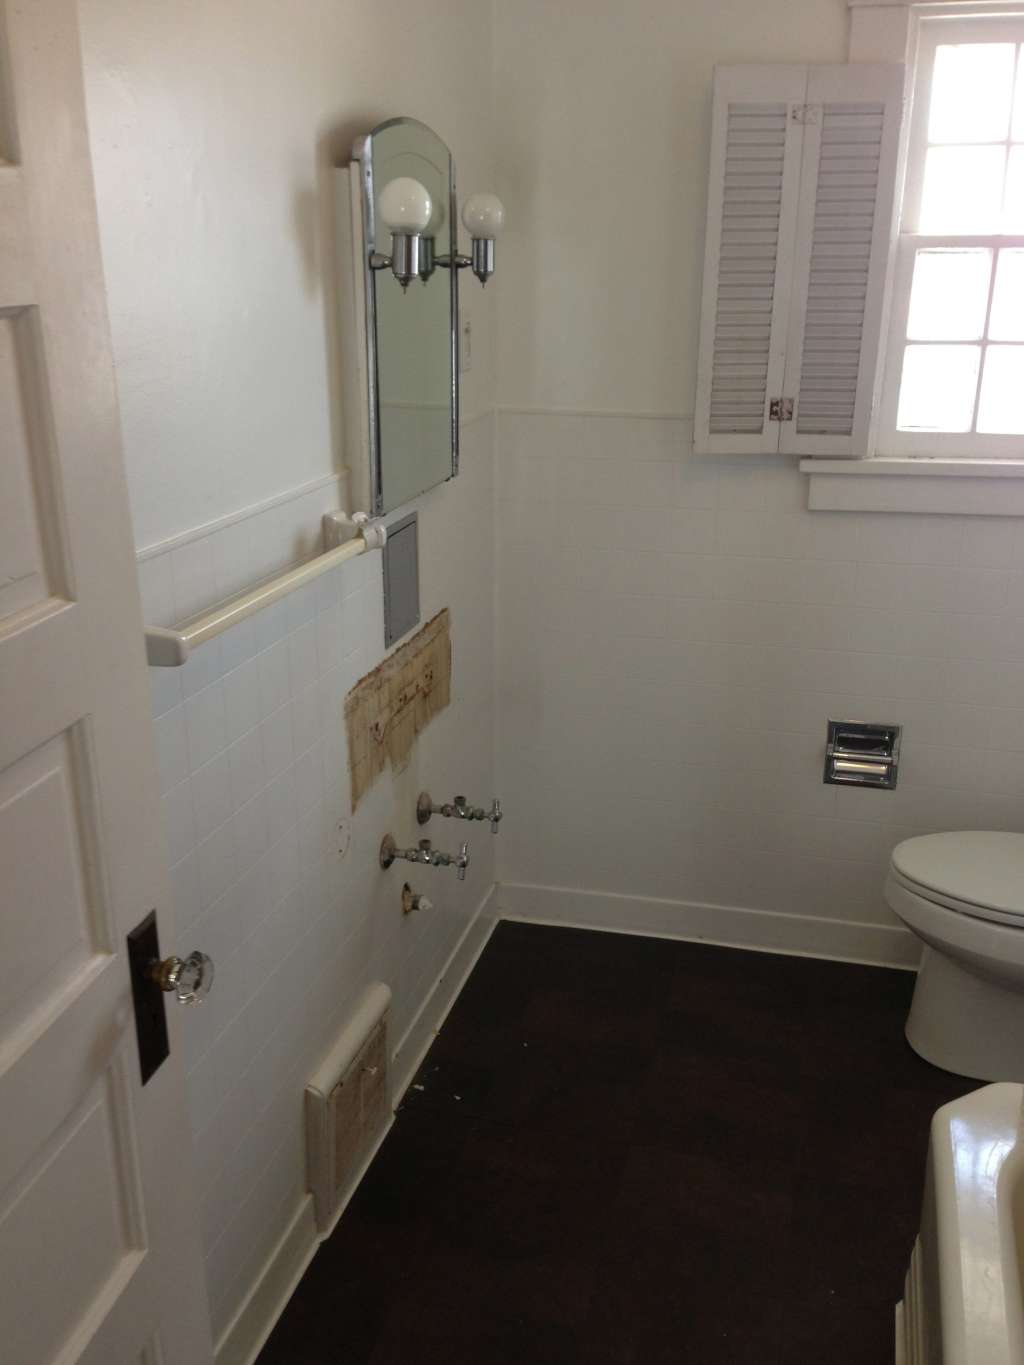 Before & After A 100 Year Old Bathroom Gets a Makeover